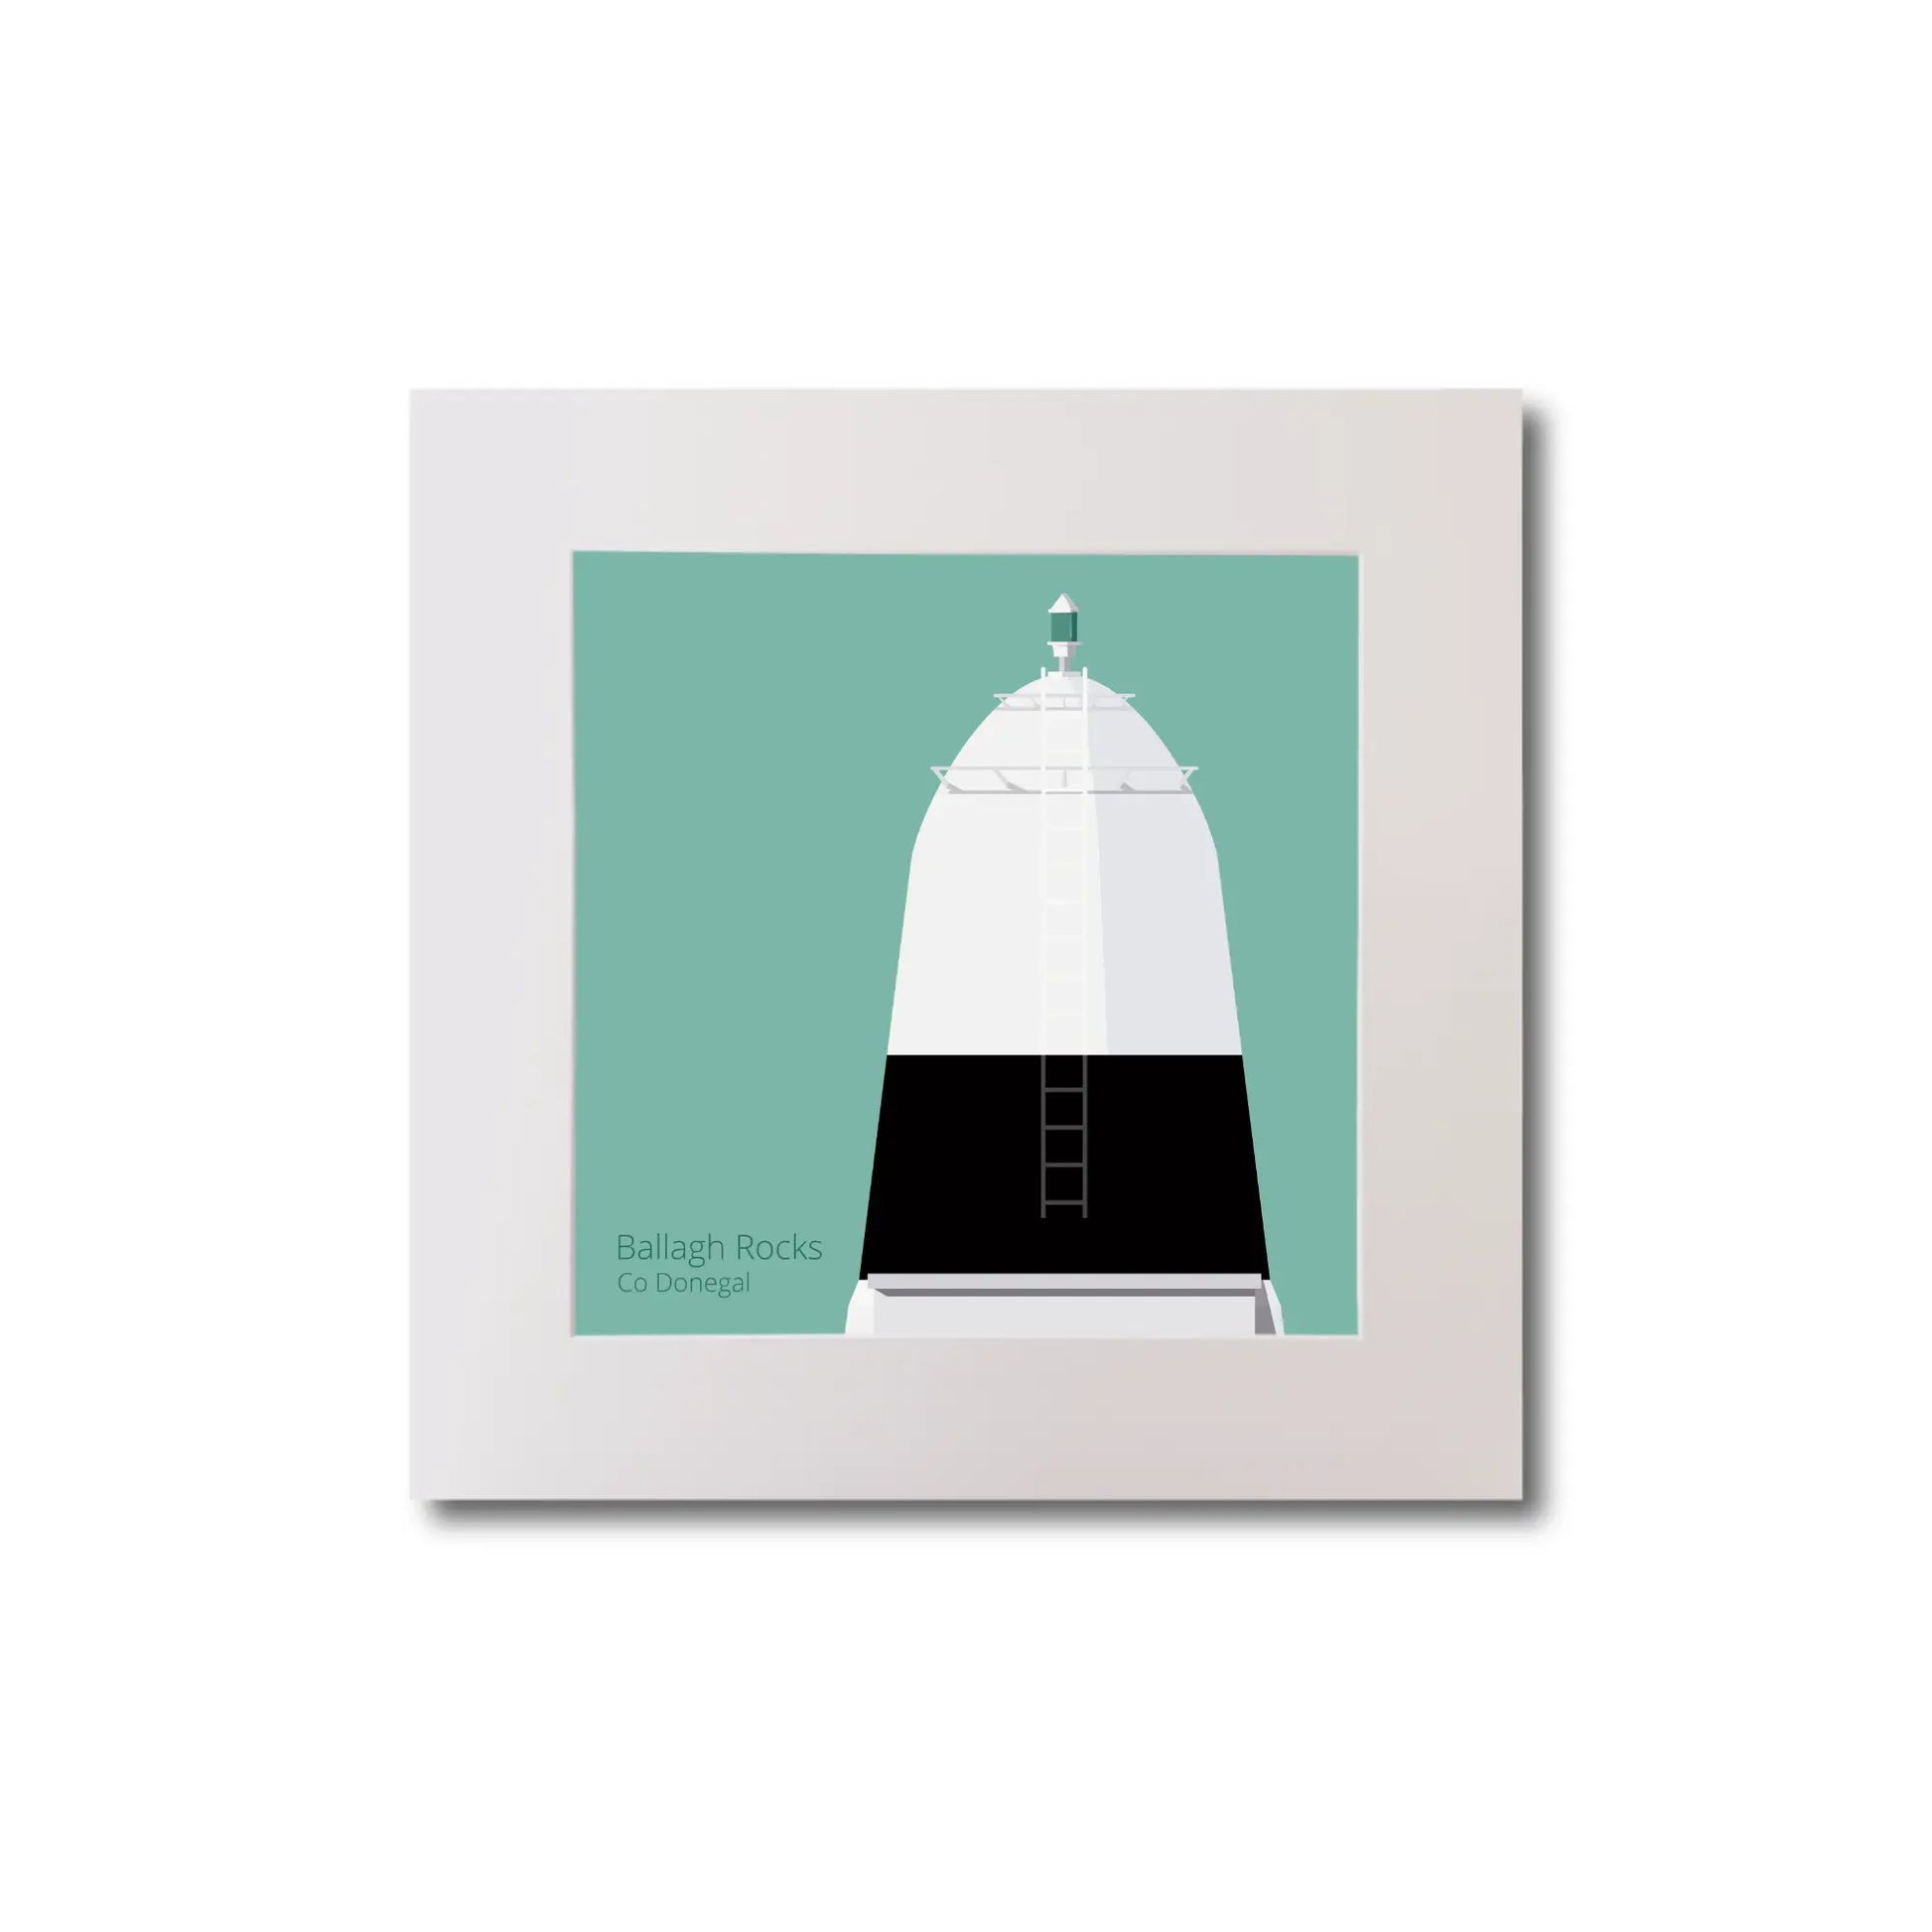 Illustration Ballagh_Rocks lighthouse on an ocean green background, mounted and measuring 20x20cm.